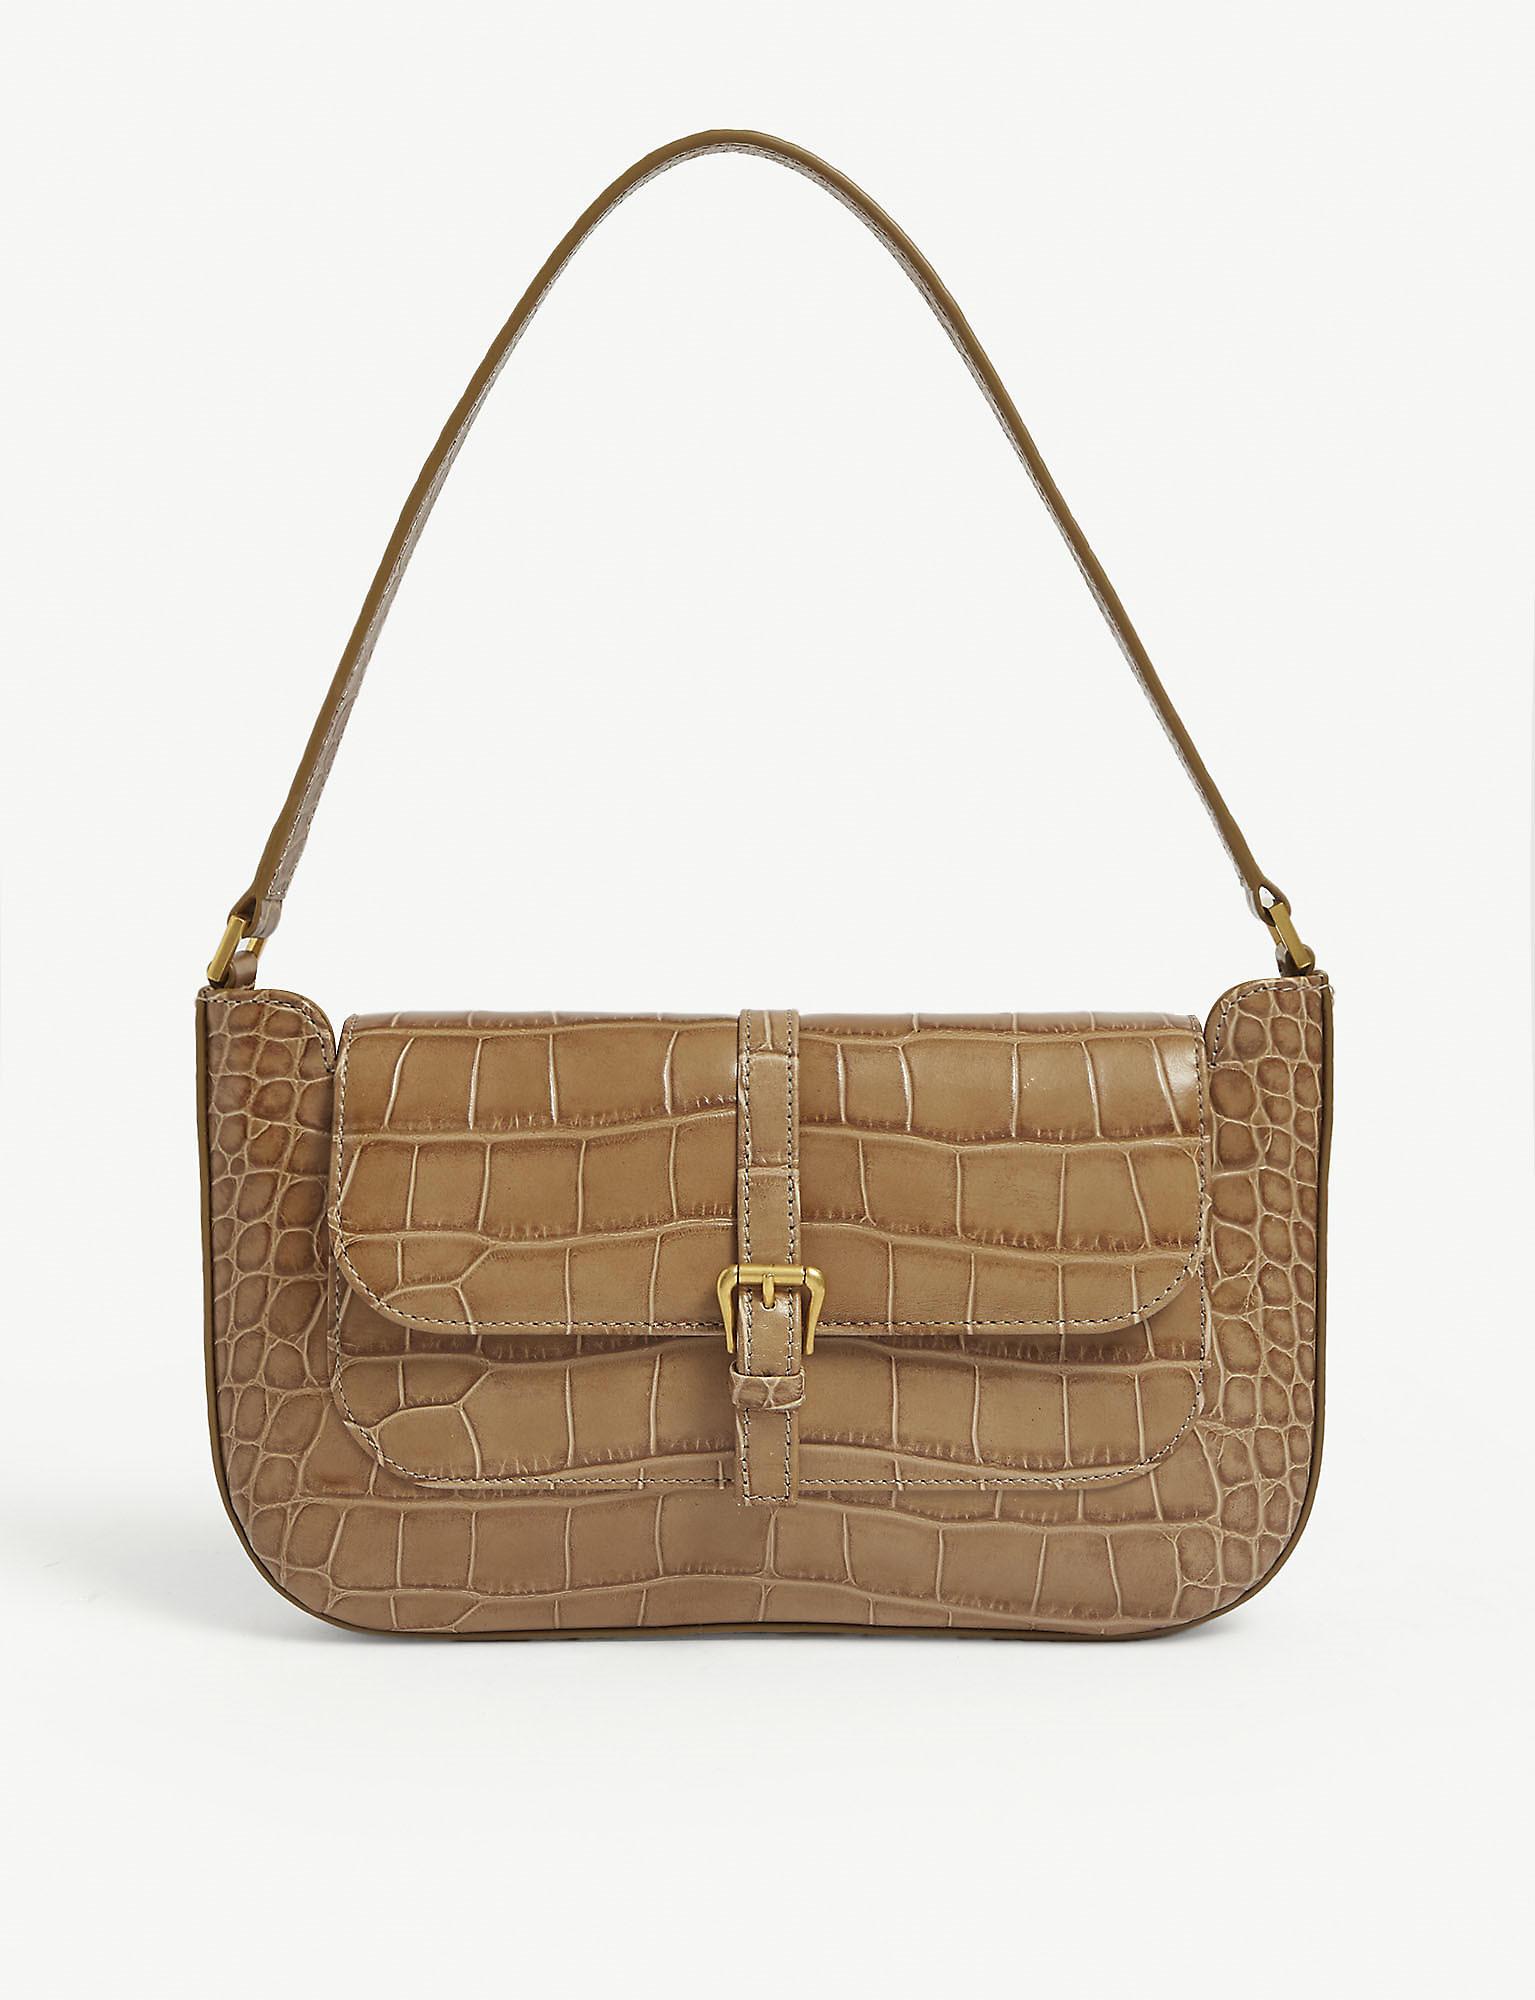 BY FAR Miranda Croc-embossed Leather Mini Shoulder Bag in Taupe (Brown) - Lyst